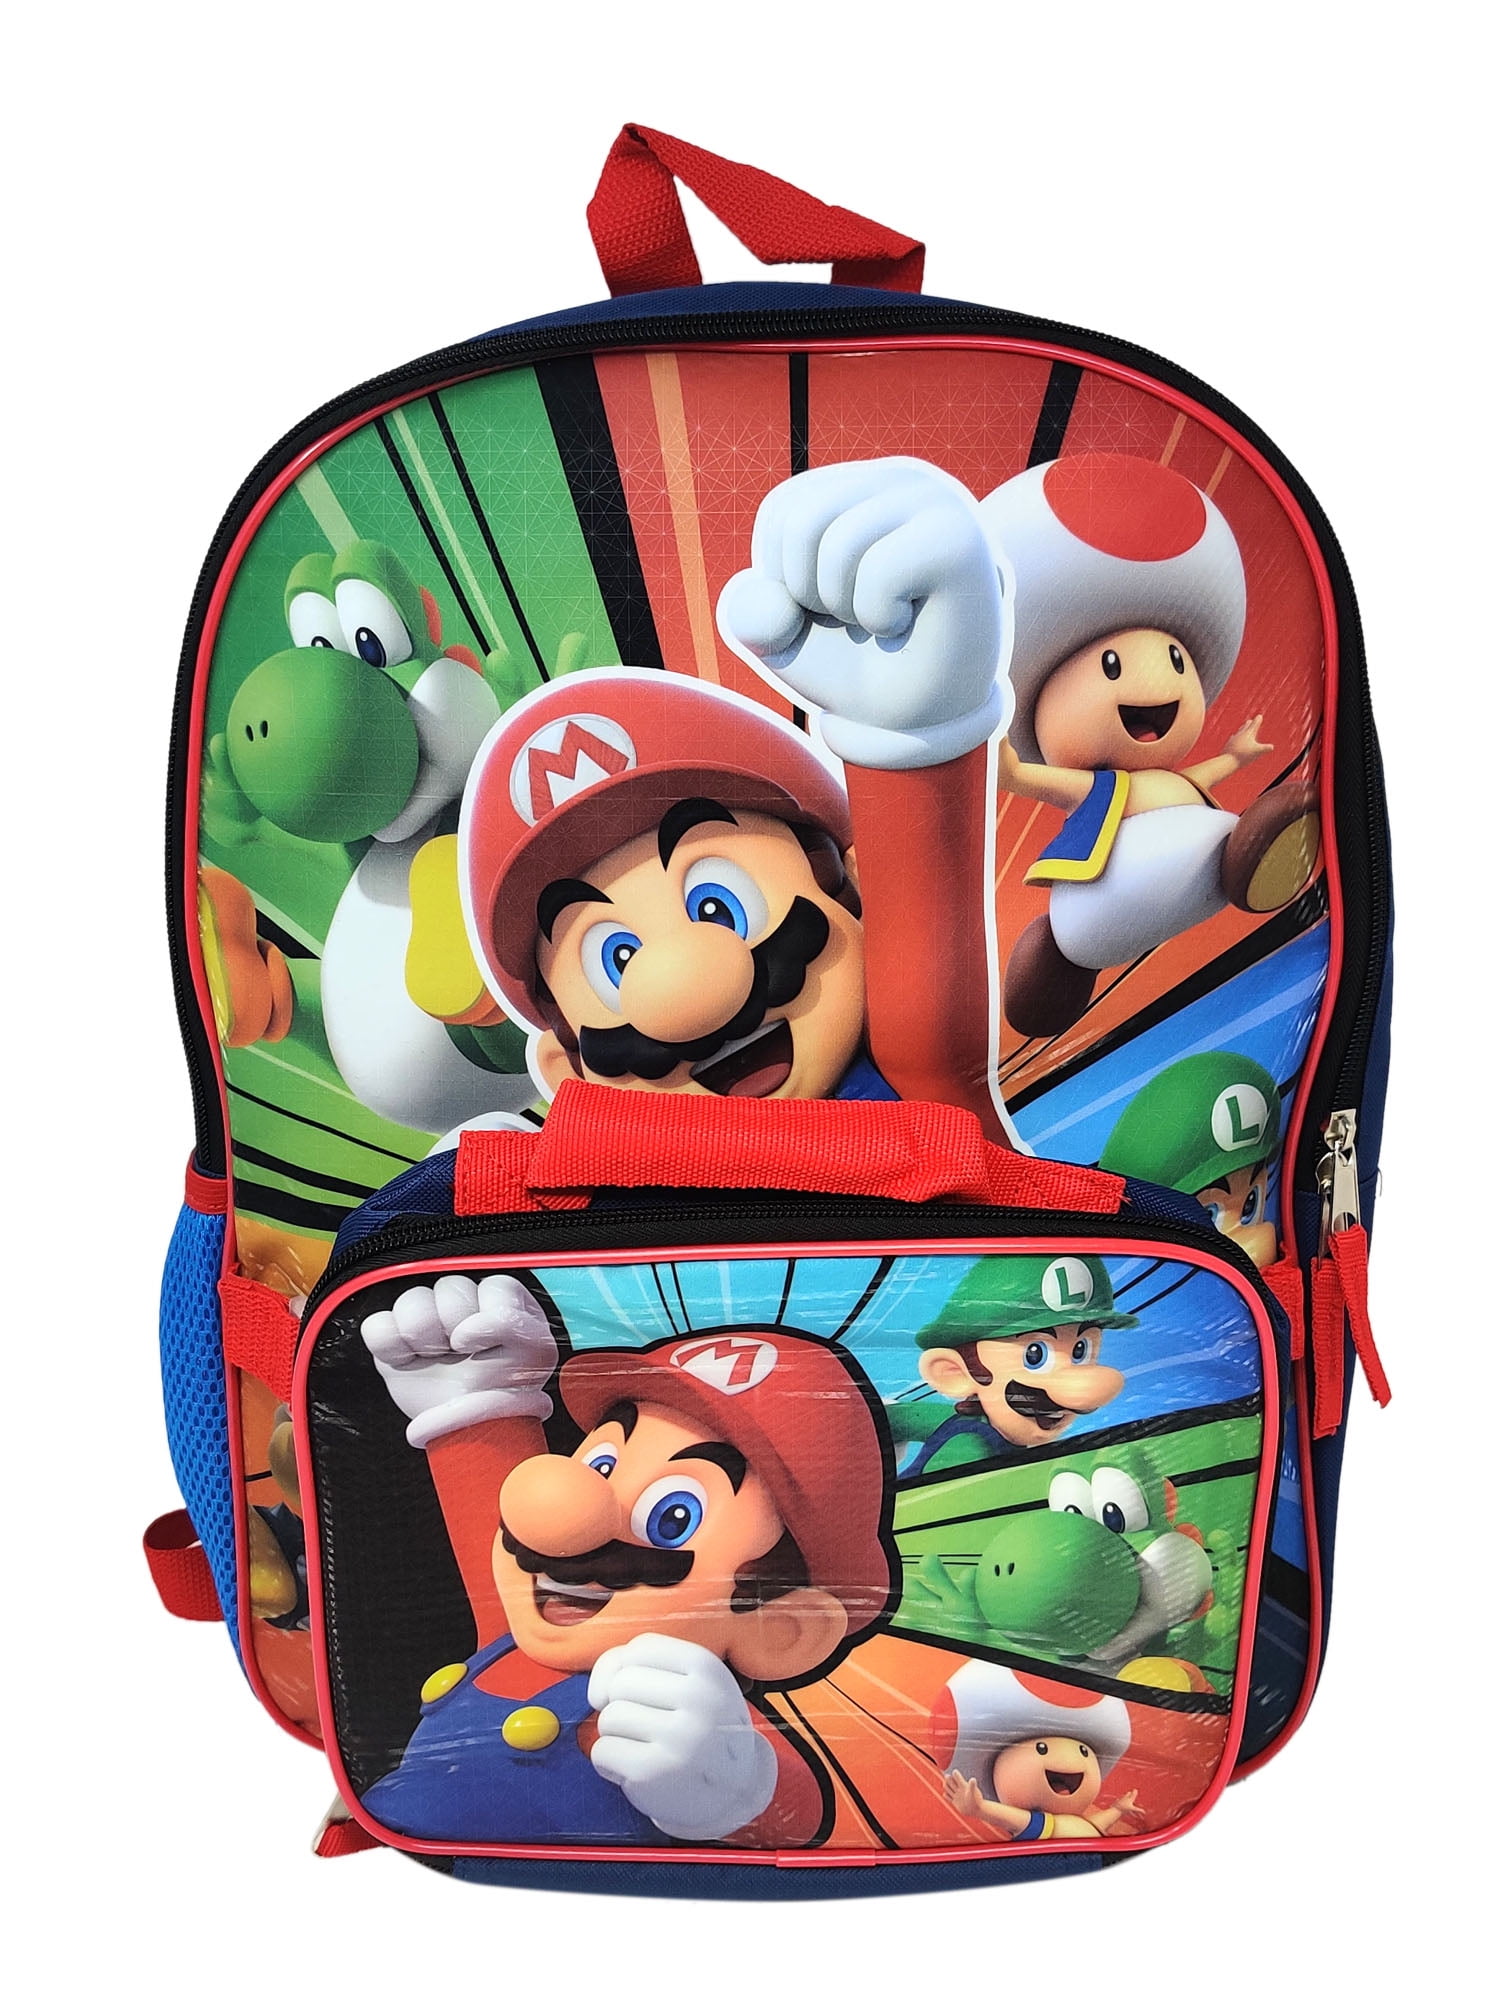 Bioworld Super Mario Boys Backpack Set with Lunch Bag 5 Piece Set, Boy's, Size: 16